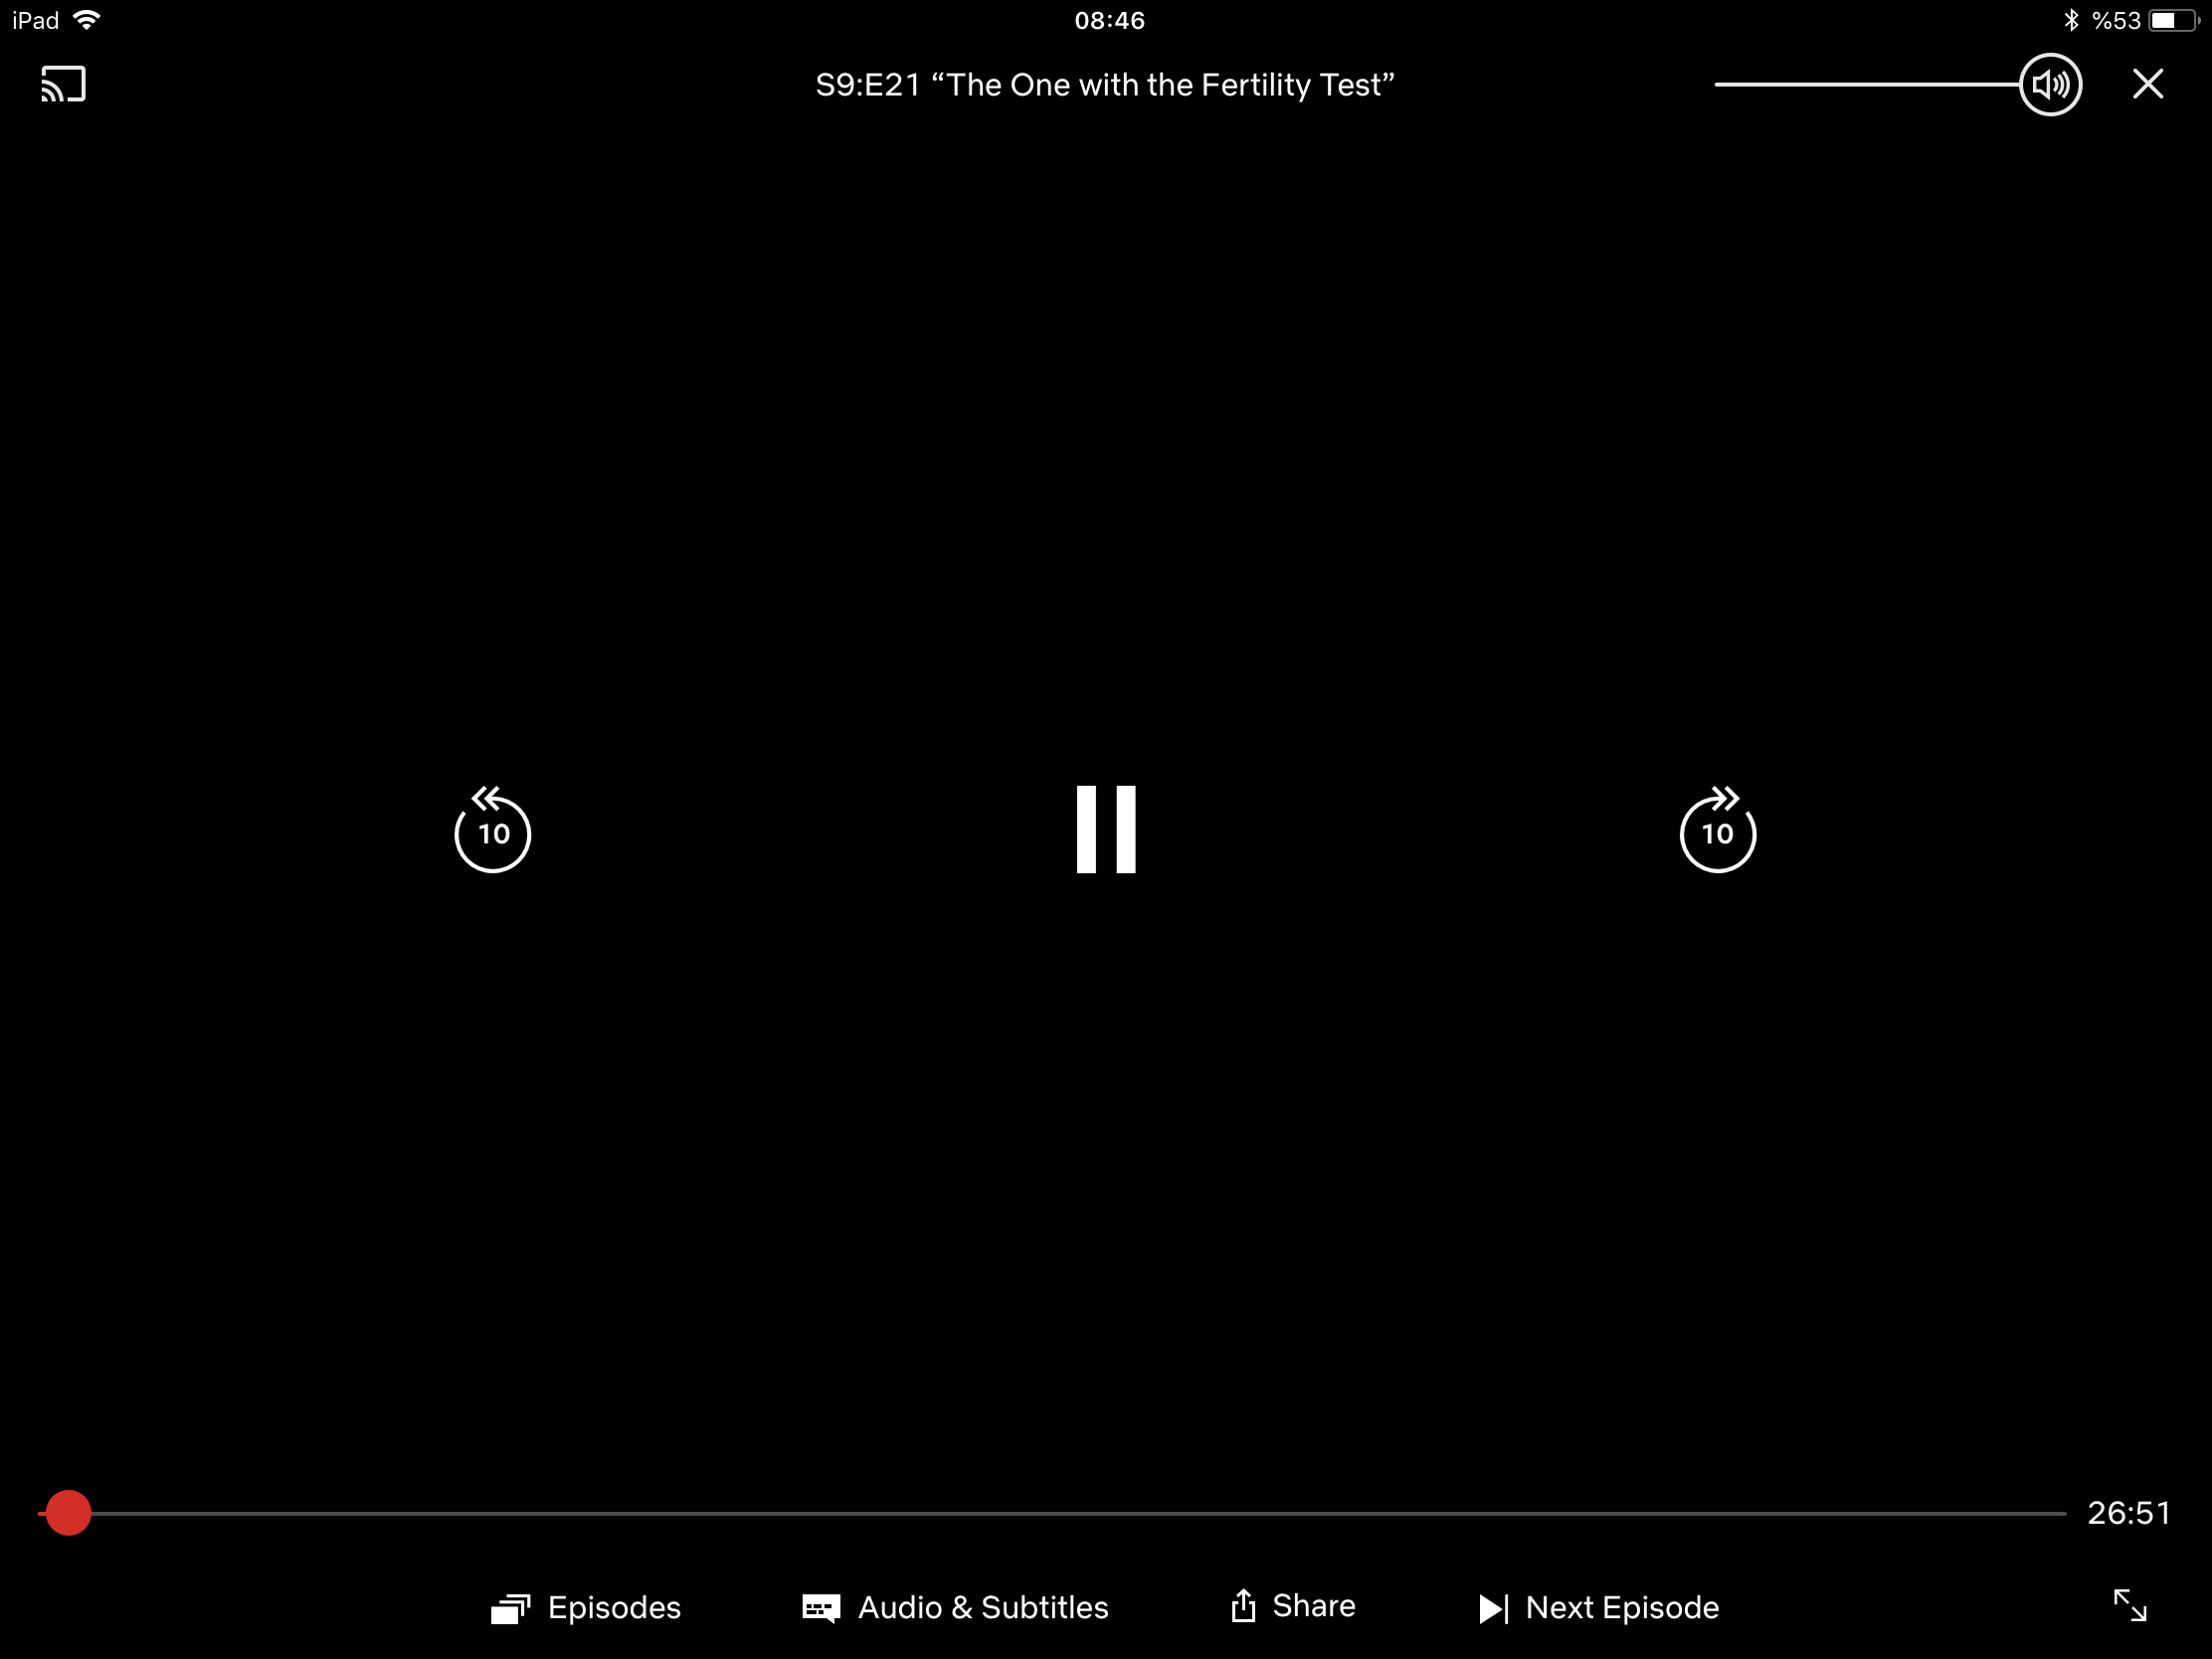 Netflix player UI I briefly saw. Top row has AirPlay button in the top left corner, the title in the middle, and the volume slider and 'close' button on the top right corner. There are huge rewind 10 seconds, play/pause, and fast forward 10 seconds buttons in the middle of the screen. On the second-to-the-bottom row, the progress bar is stretched from edge to edge, only with the remaining time attached to the right side of it. The bottom line has episodes, audio and subtitles, share, and next episode buttons in the center, with labels, and there is a single icon for video size button, at the bottom right corner.